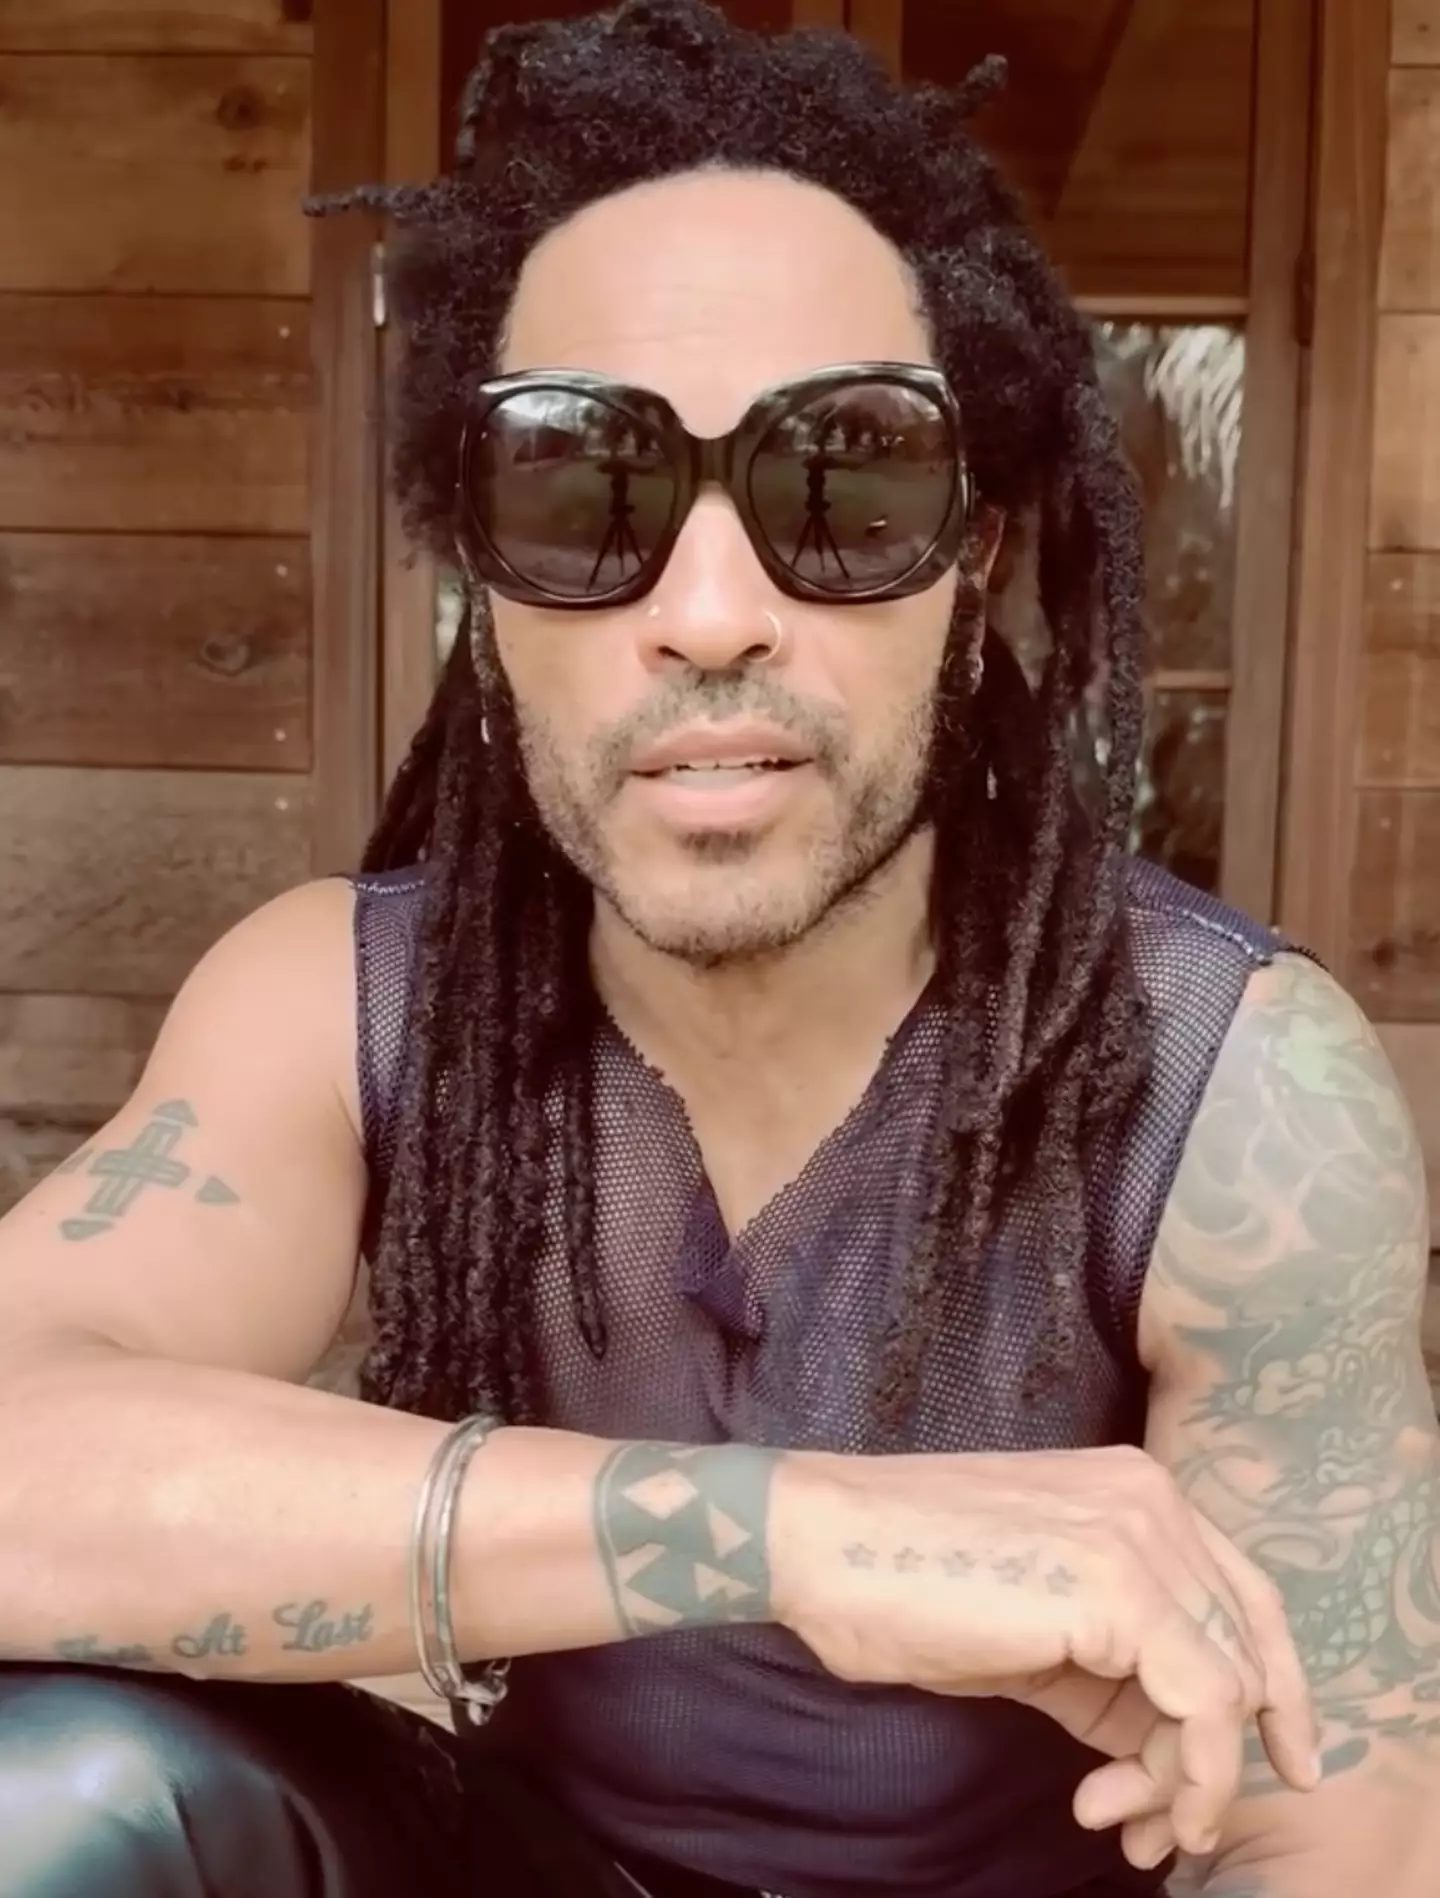 The singer's known for being a bit of a style icon. (Instagram/@lennykravitz)